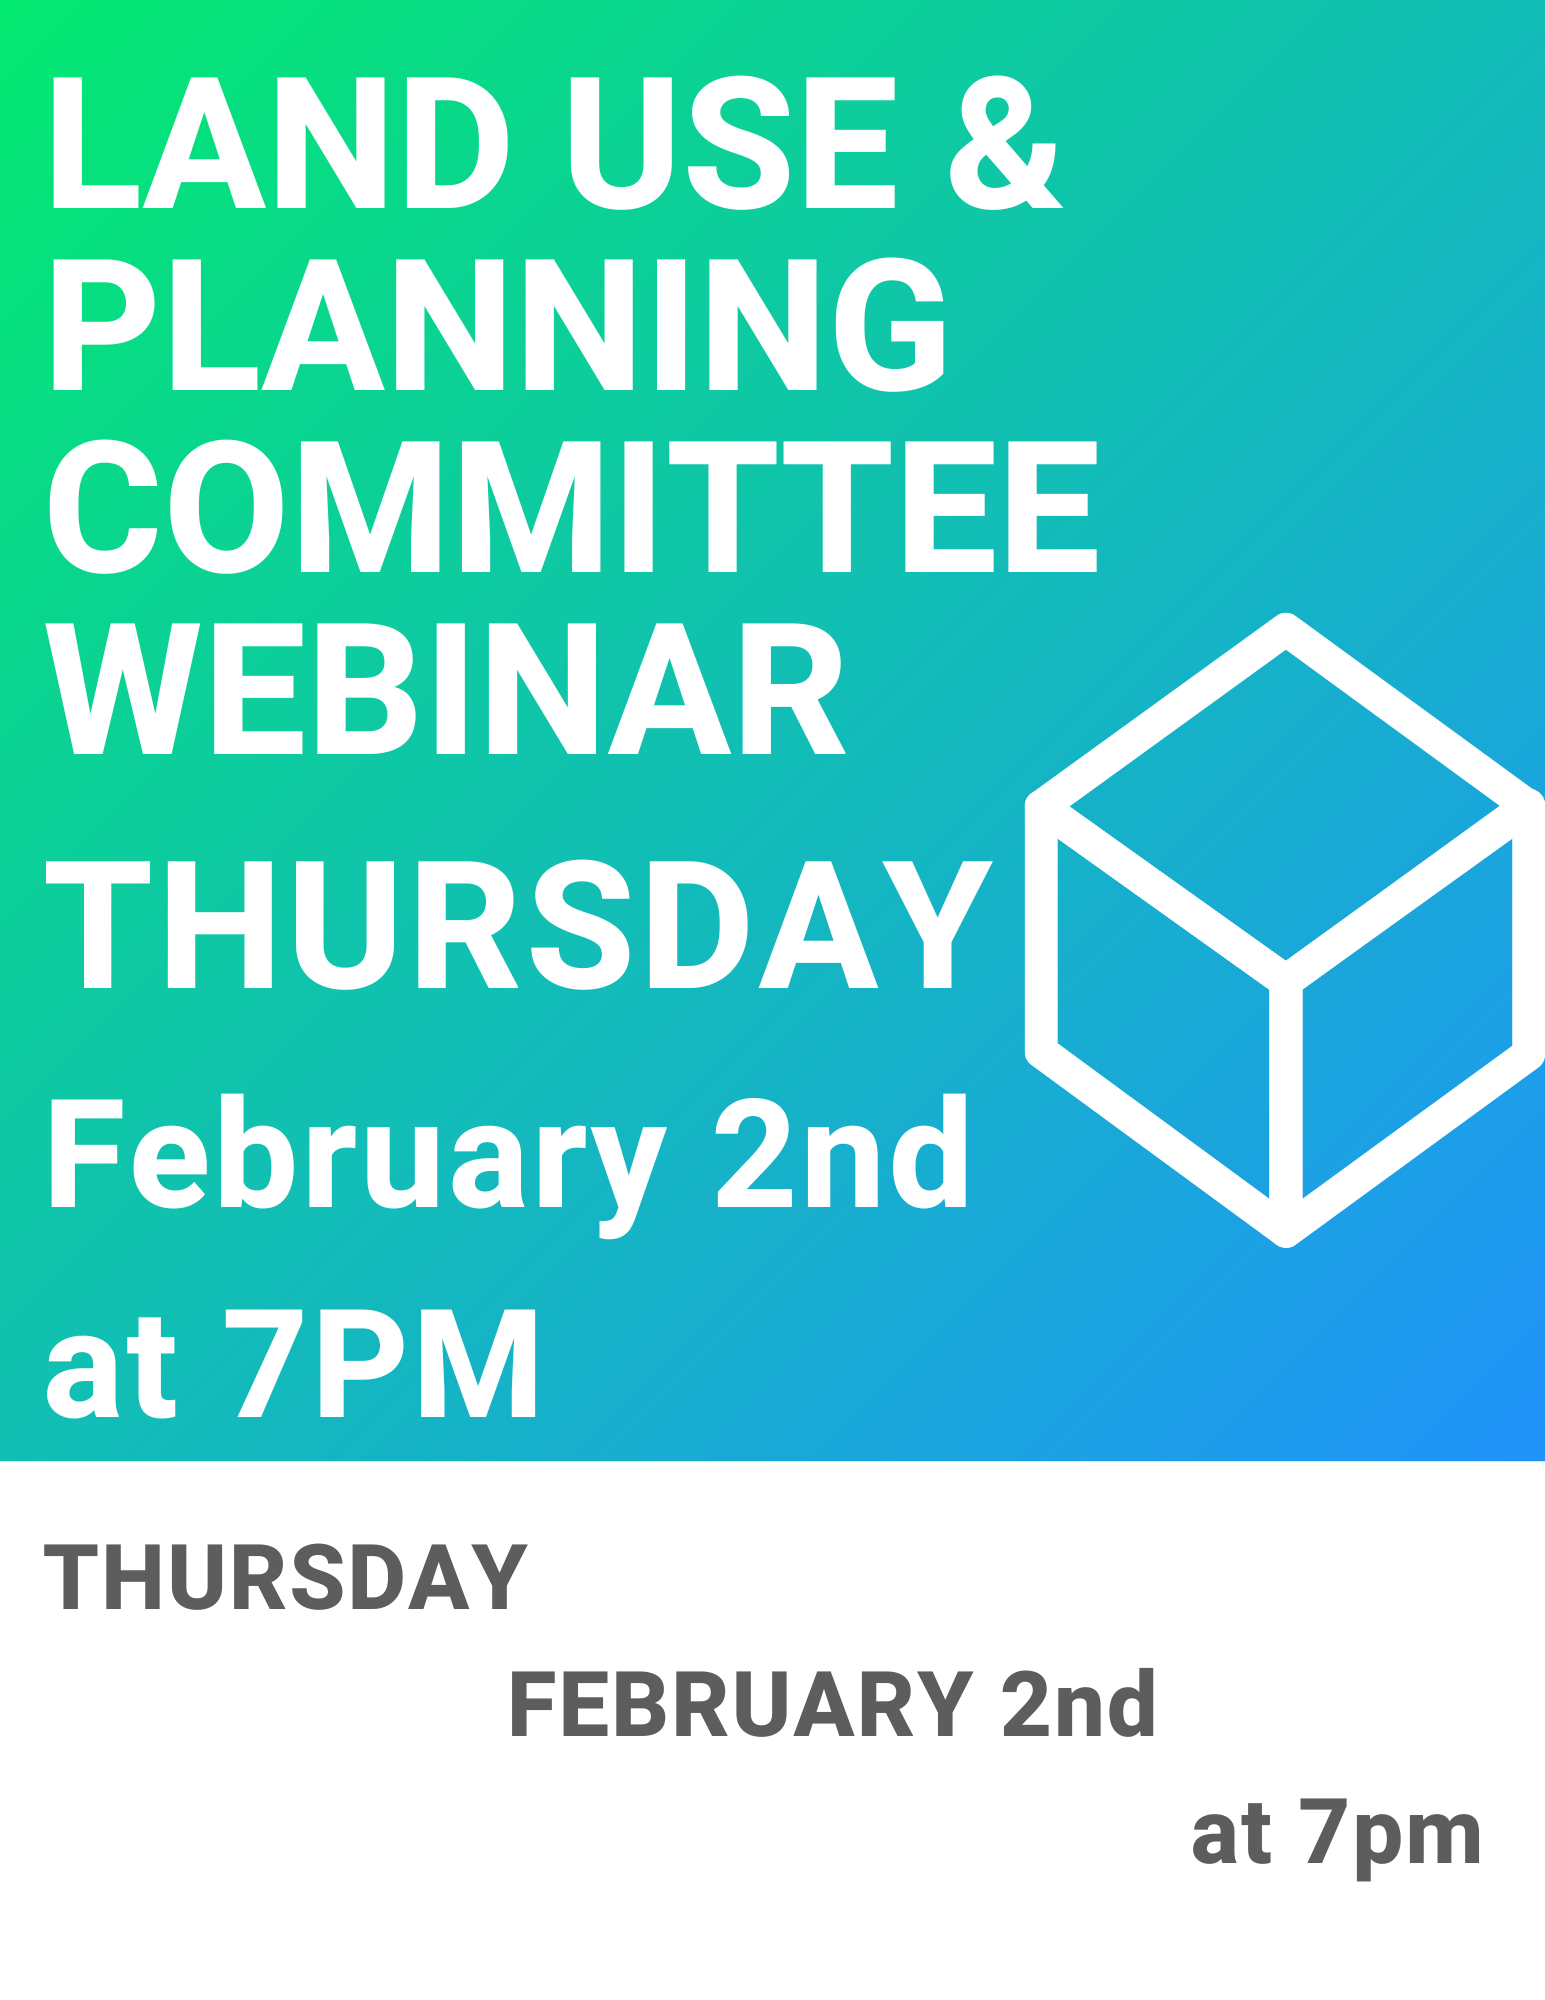 📌THURSDAY✹Land Use & Planning Committee (LUPC) Meeting✹Feb. 2, at 7pm